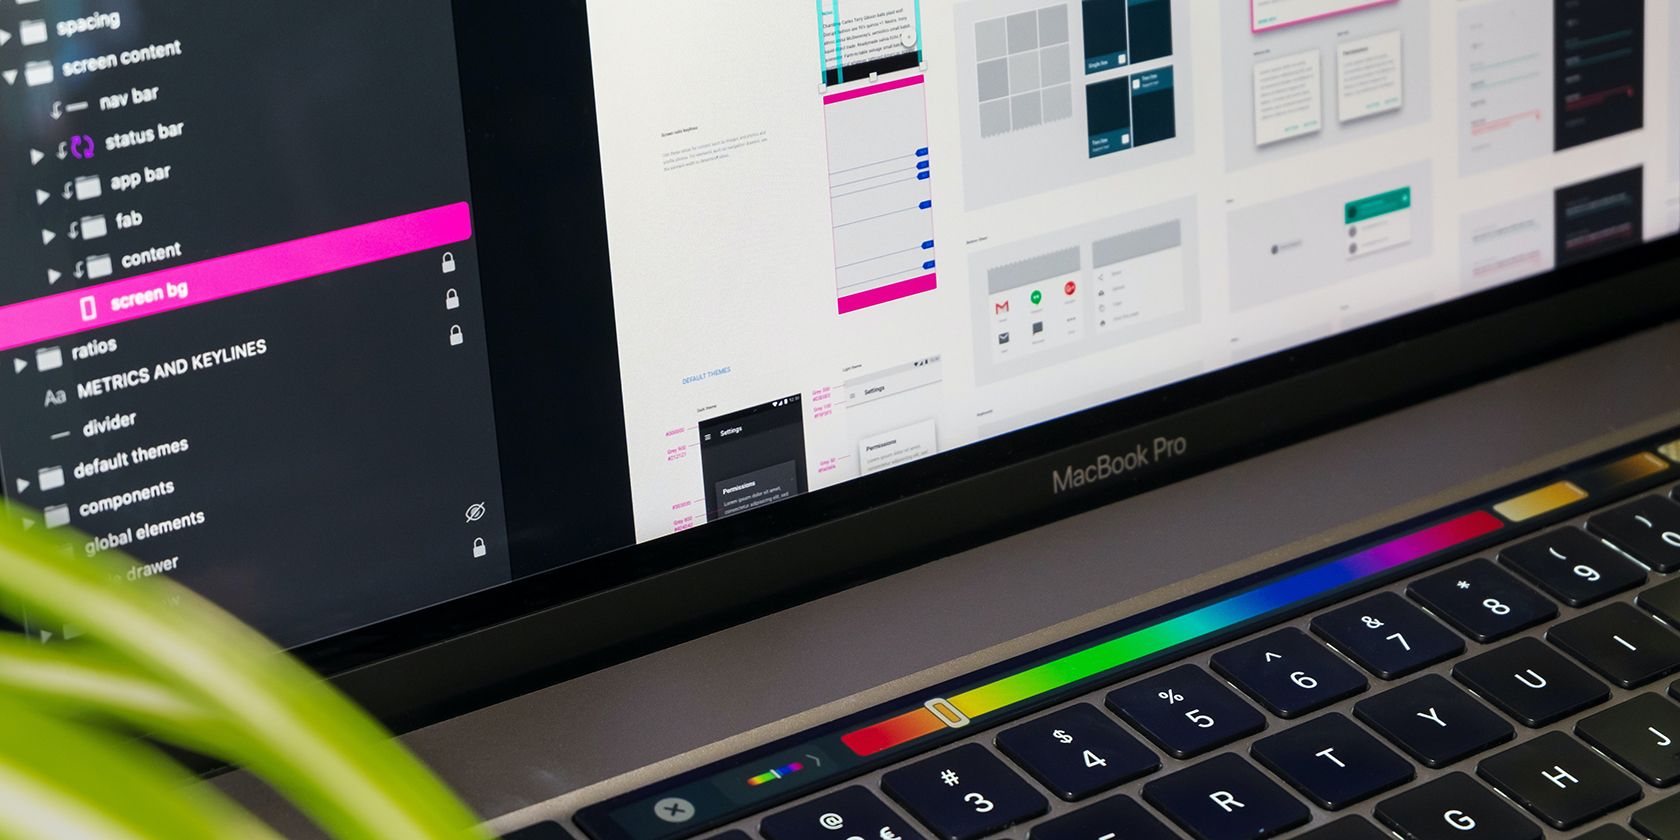 A MacBook Pro Running an App That Changes the Touch Bar's Functions